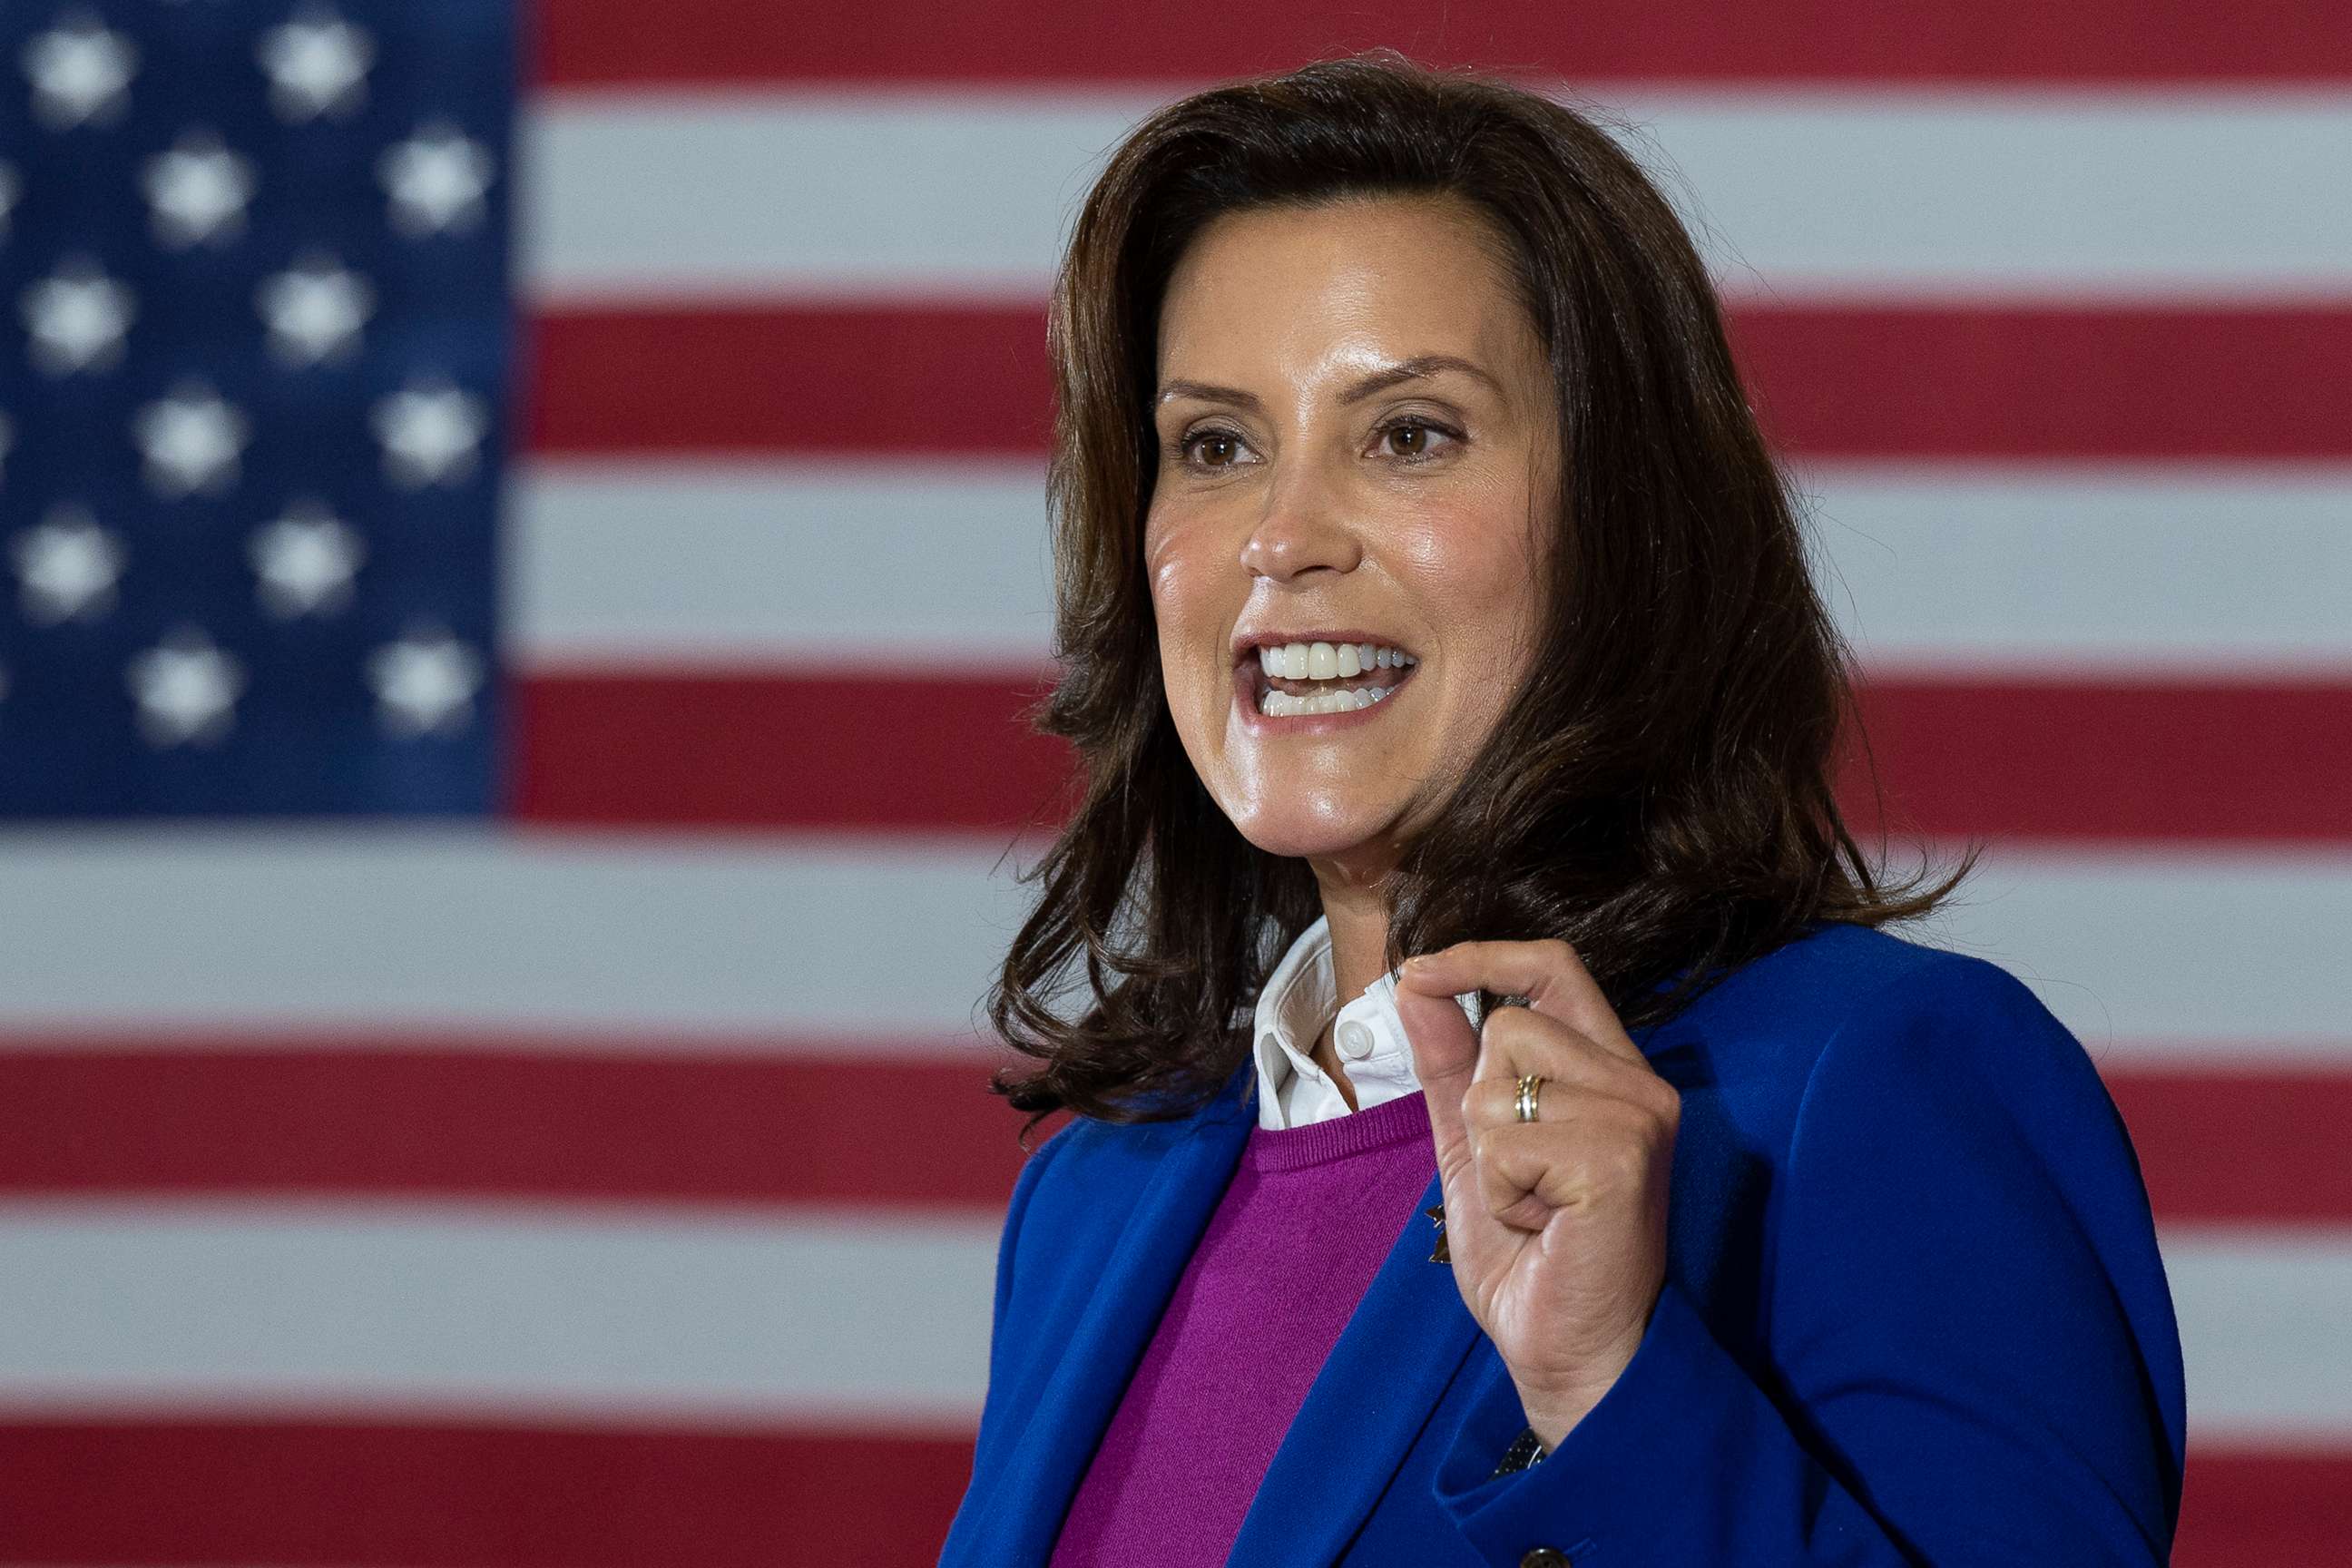 PHOTO: In this Oct. 16, 2020 file photo Michigan Governor Gretchen Whitmer speaks at Beech Woods Recreation Center in Southfield, Mich..